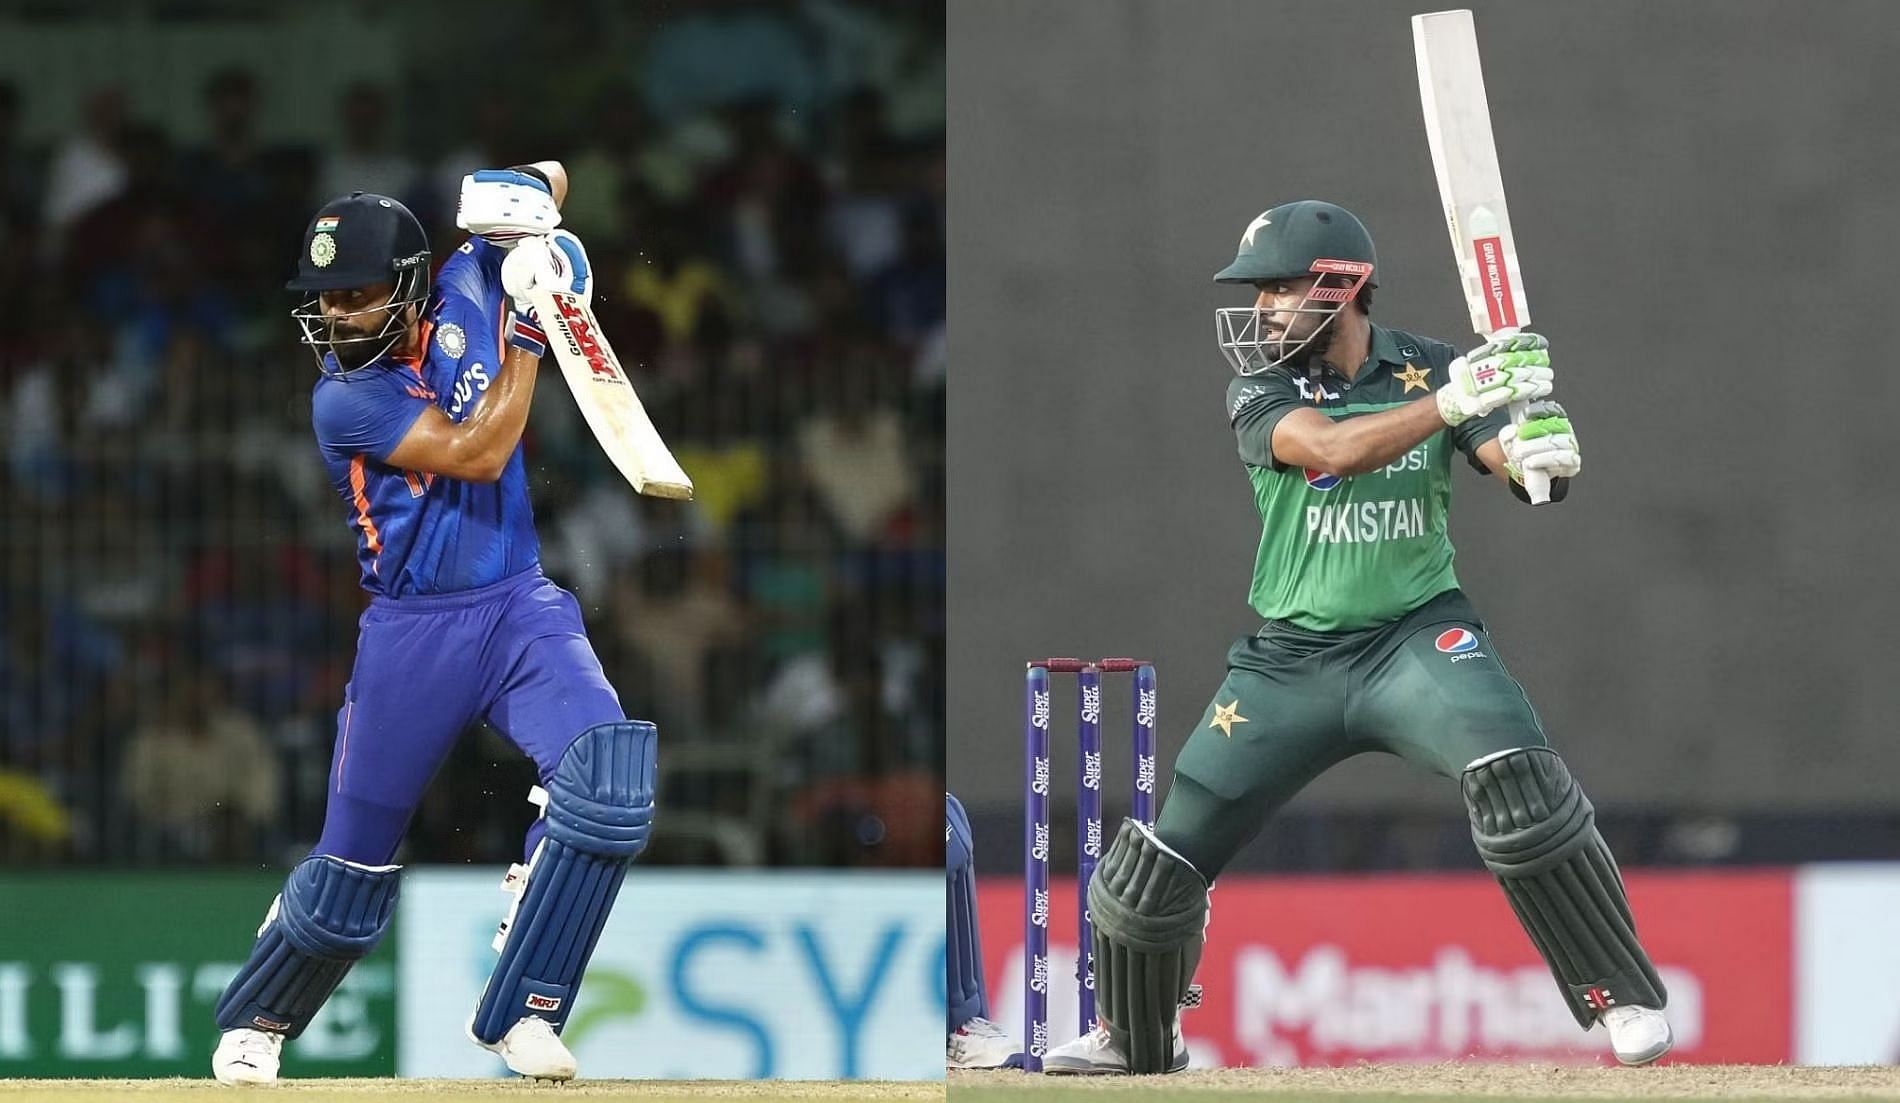 Virat Kohli (L) and Babar Azam have exceptional records in ODI cricket. [P/C: Getty &amp; AP]